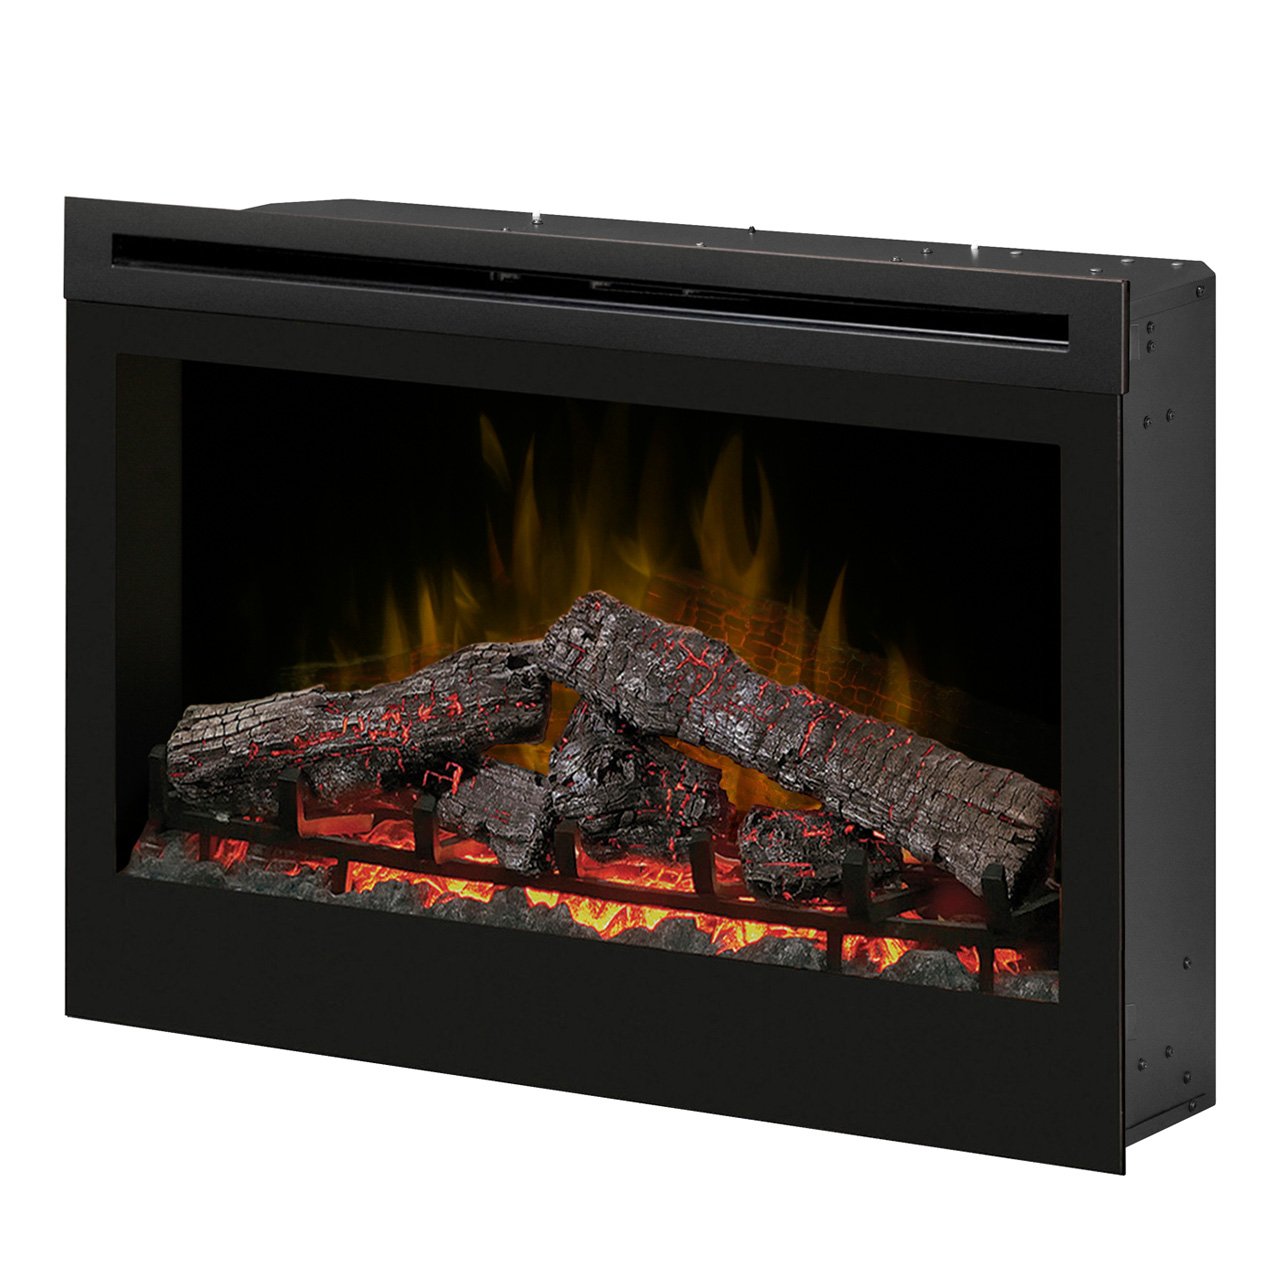 Fireplace Music Lovely Dimplex Df3033st 33 Inch Self Trimming Electric Fireplace Insert